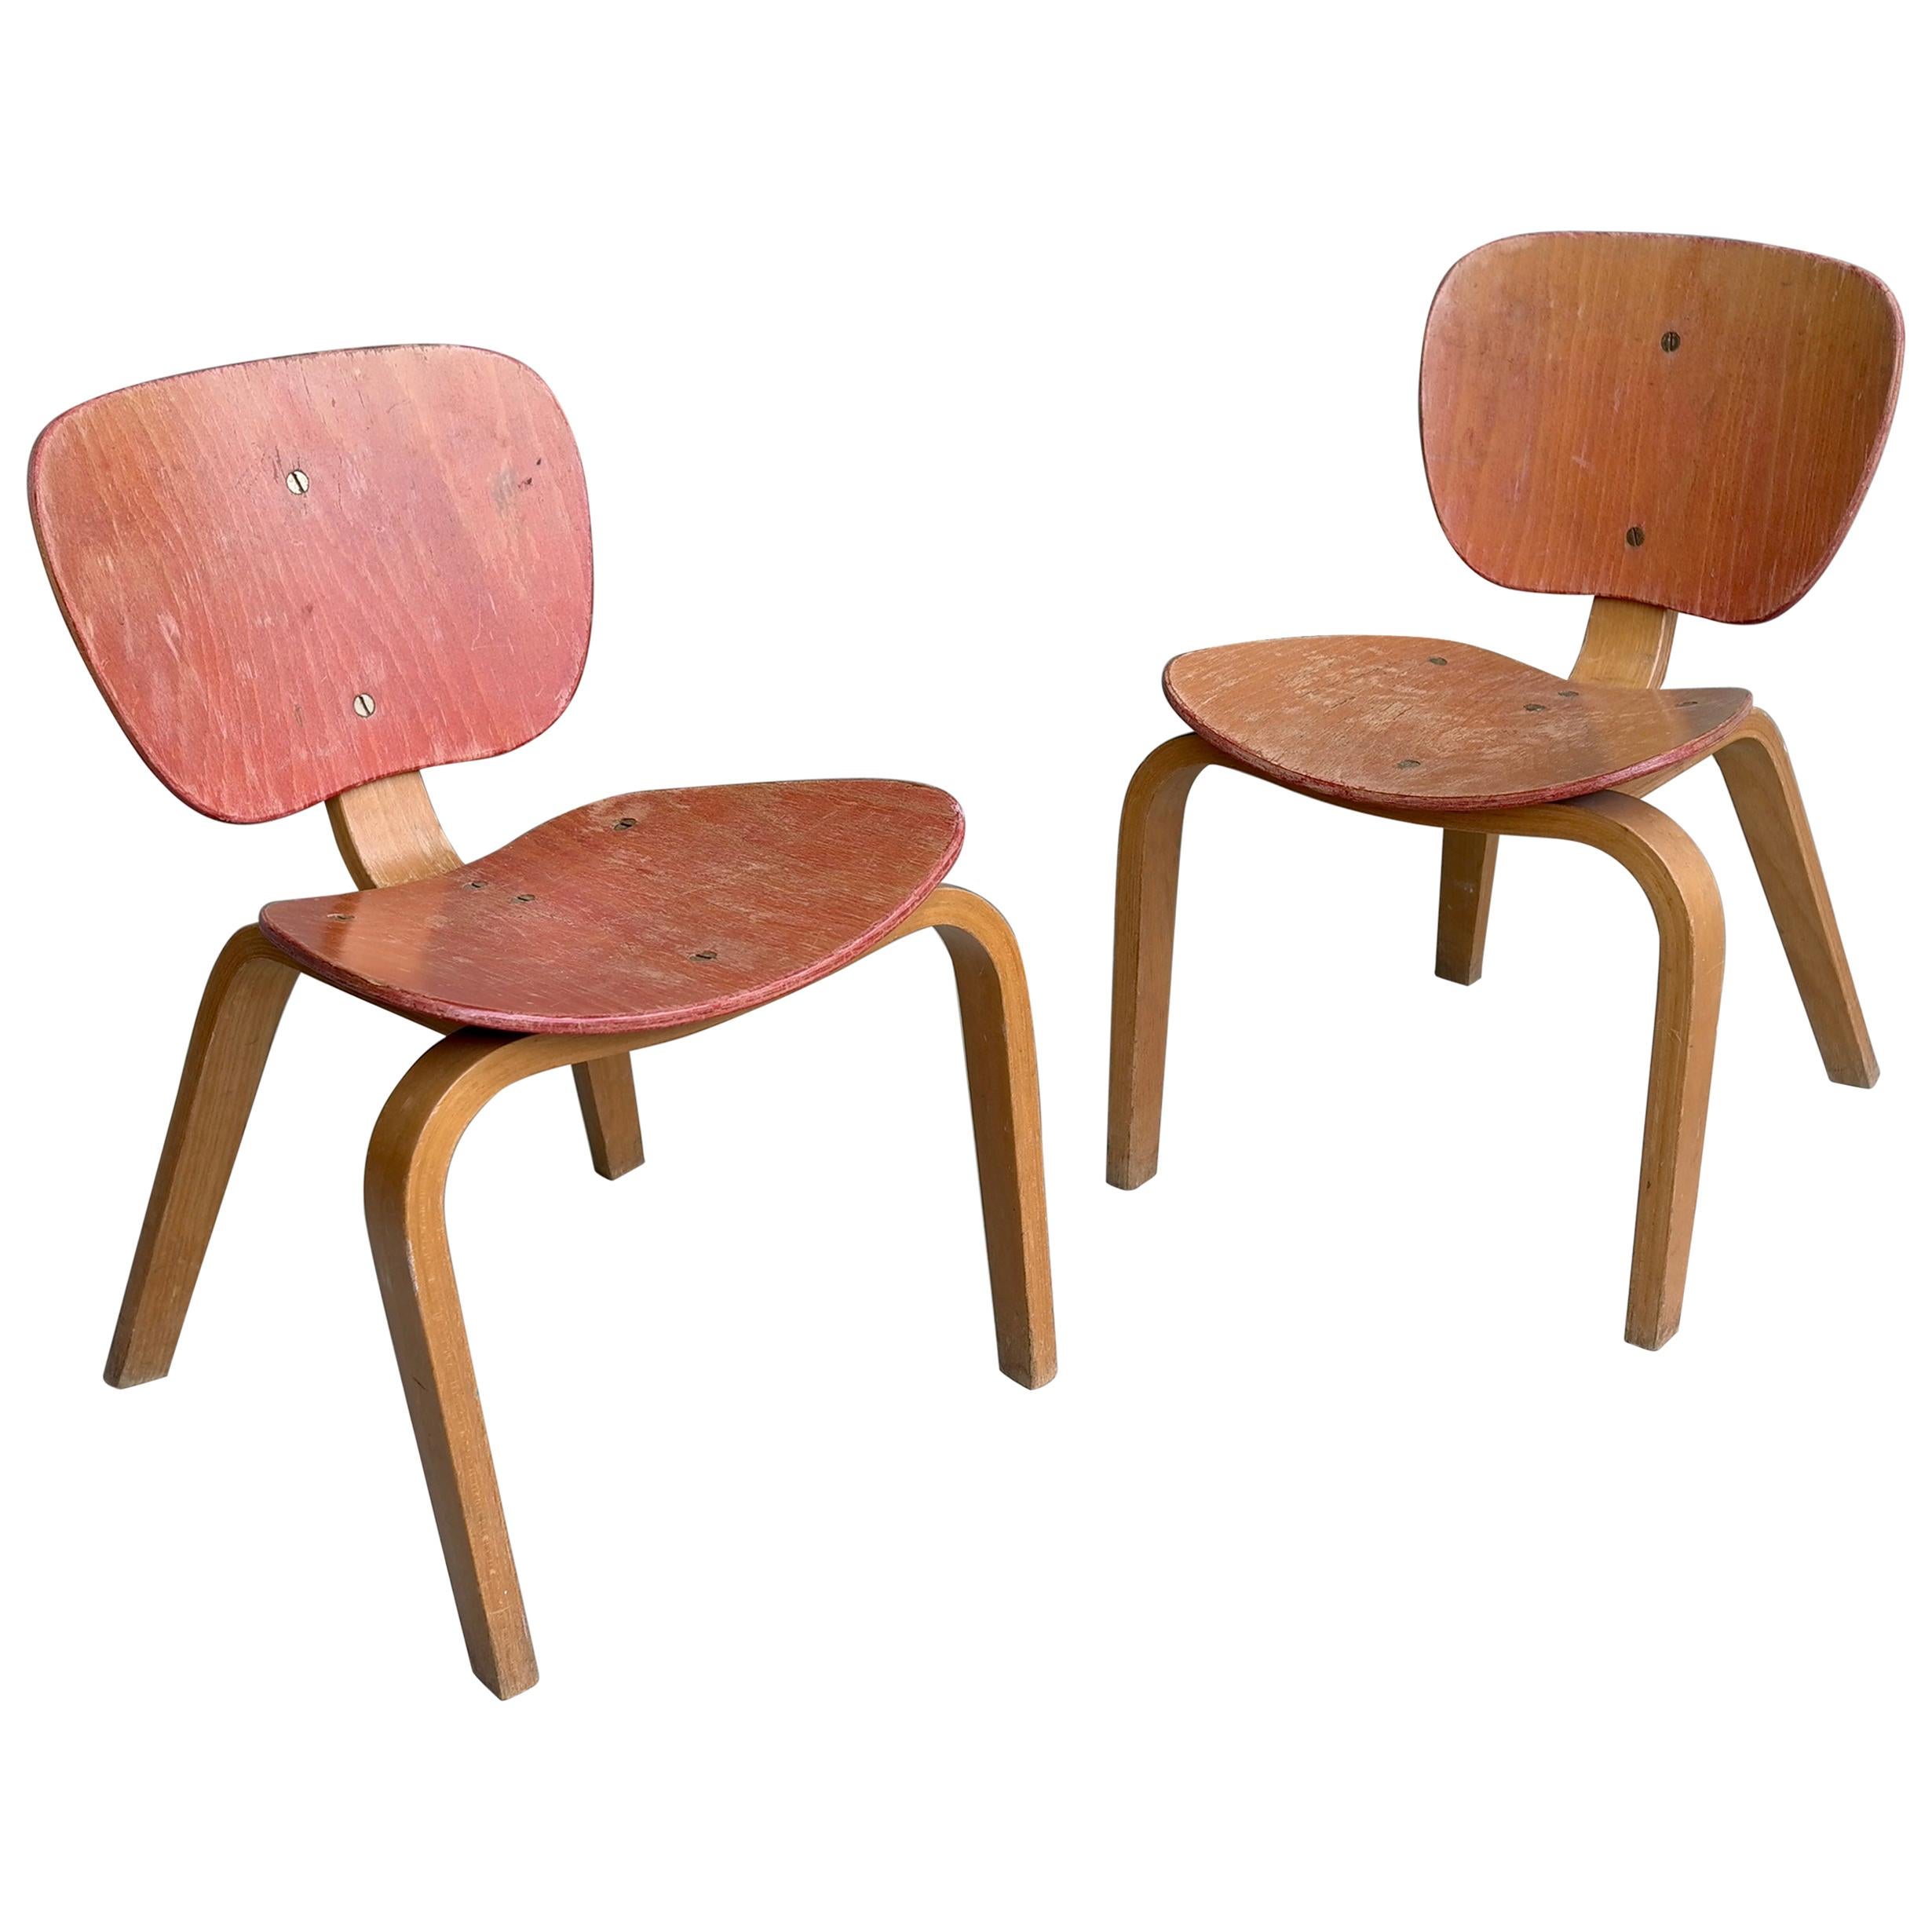 Pair of Midcentury Children Chairs in Bent Plywood, Germany, 1950s